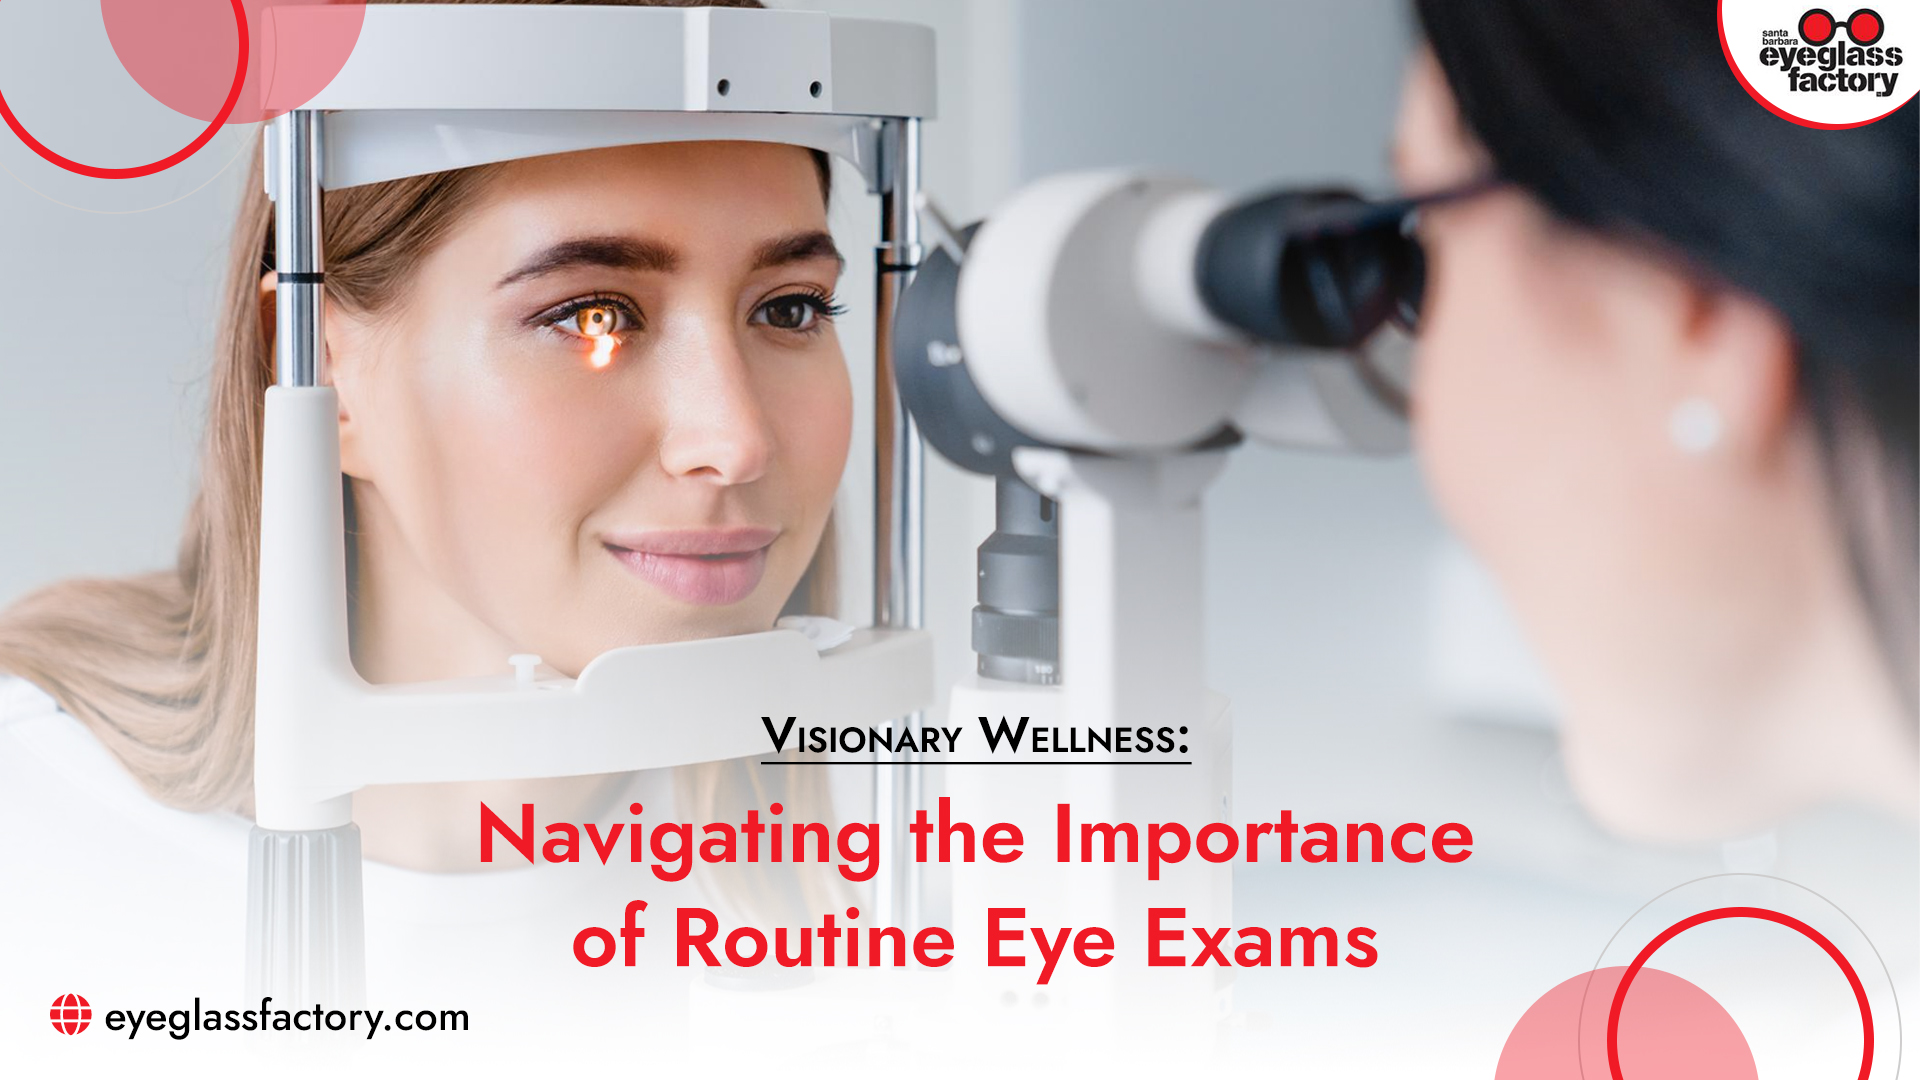 Navigating the Importance of Routine Eye Exams